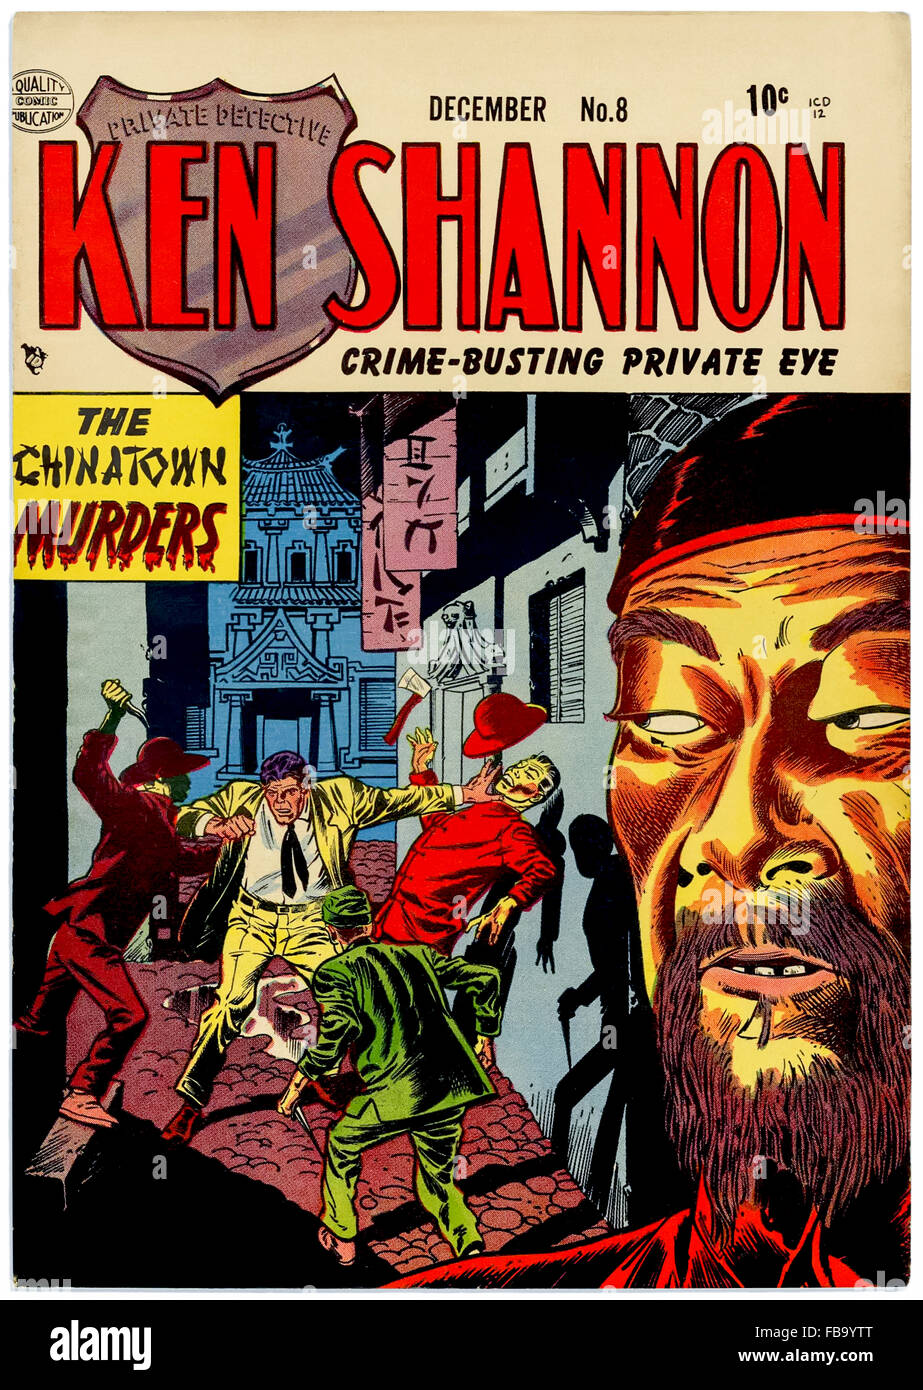 'Ken Shannon' Issue 8, December 1952 published by Quality Comics Group featuring the story 'The Chinatown Murders' where the crime busting private investigator investigates murders in an opium den. Artwork by Reed Crandall (1917-1982), story by Robert Bernstein (1919-1988). See description for more information. Stock Photo